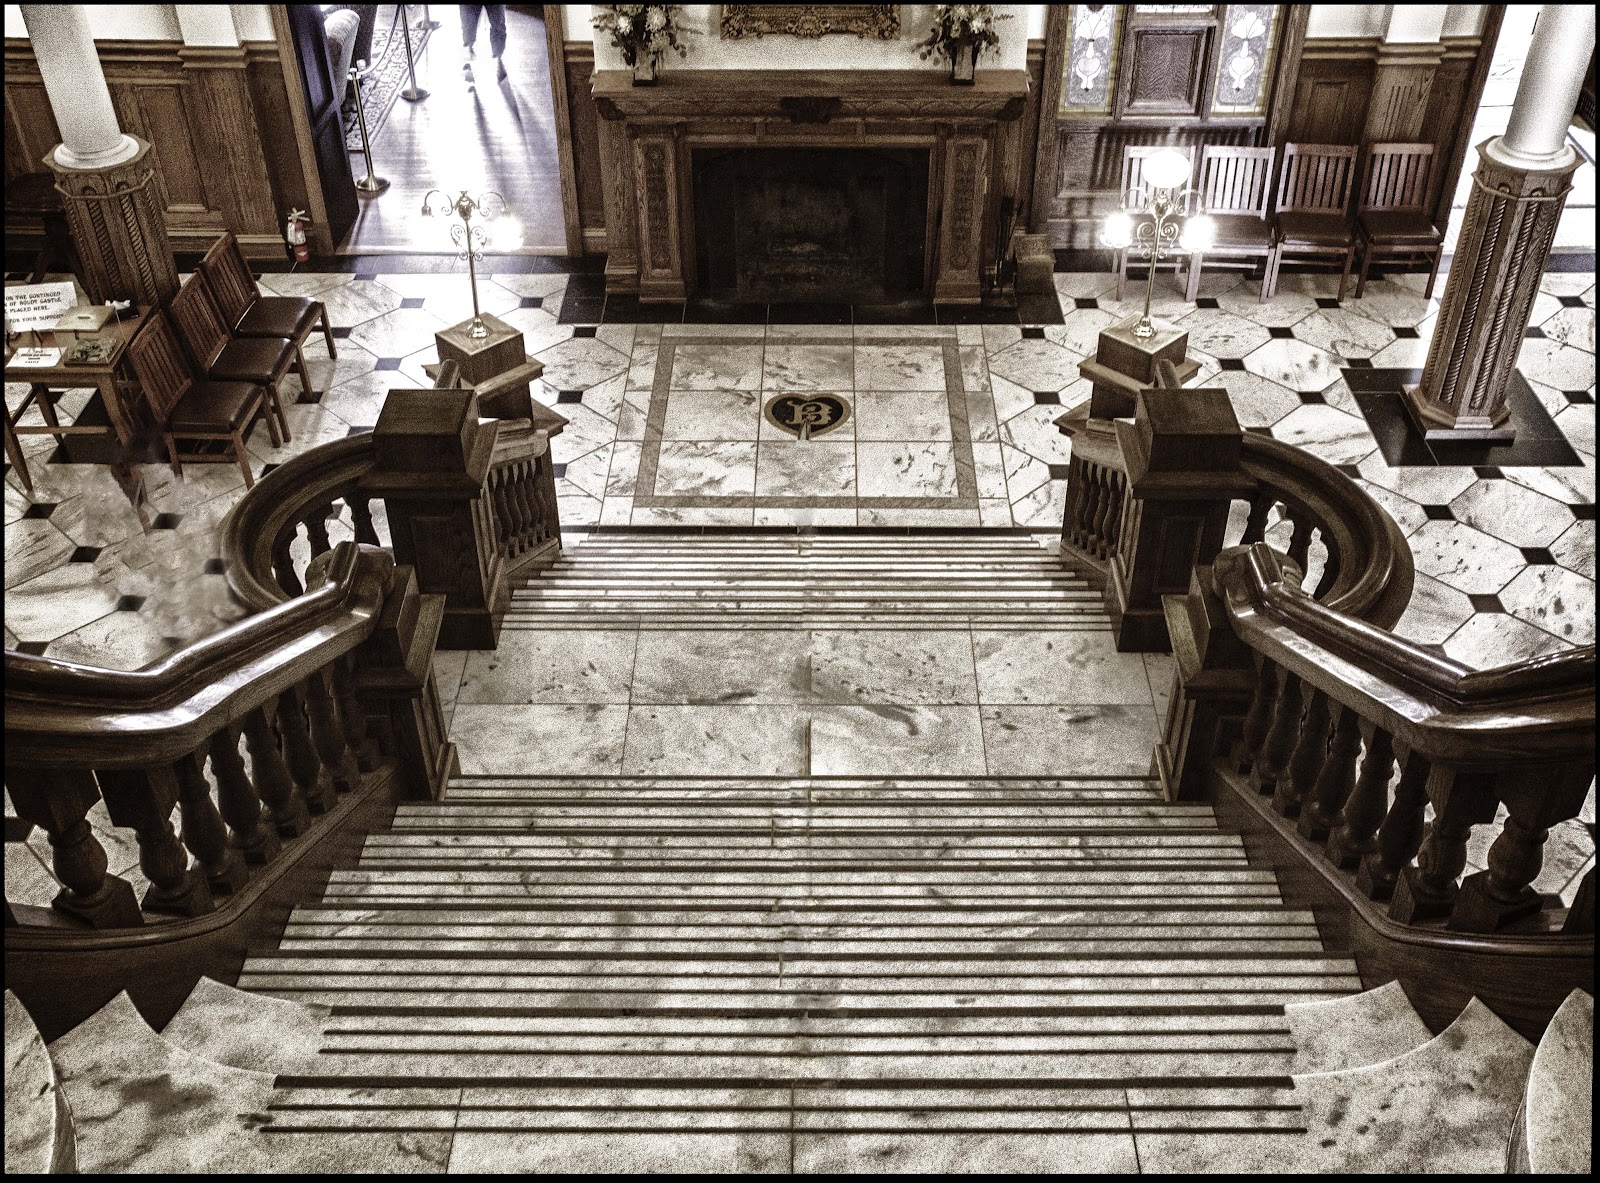 A Castle in the Thousand Islands: The Staircase on the main floor